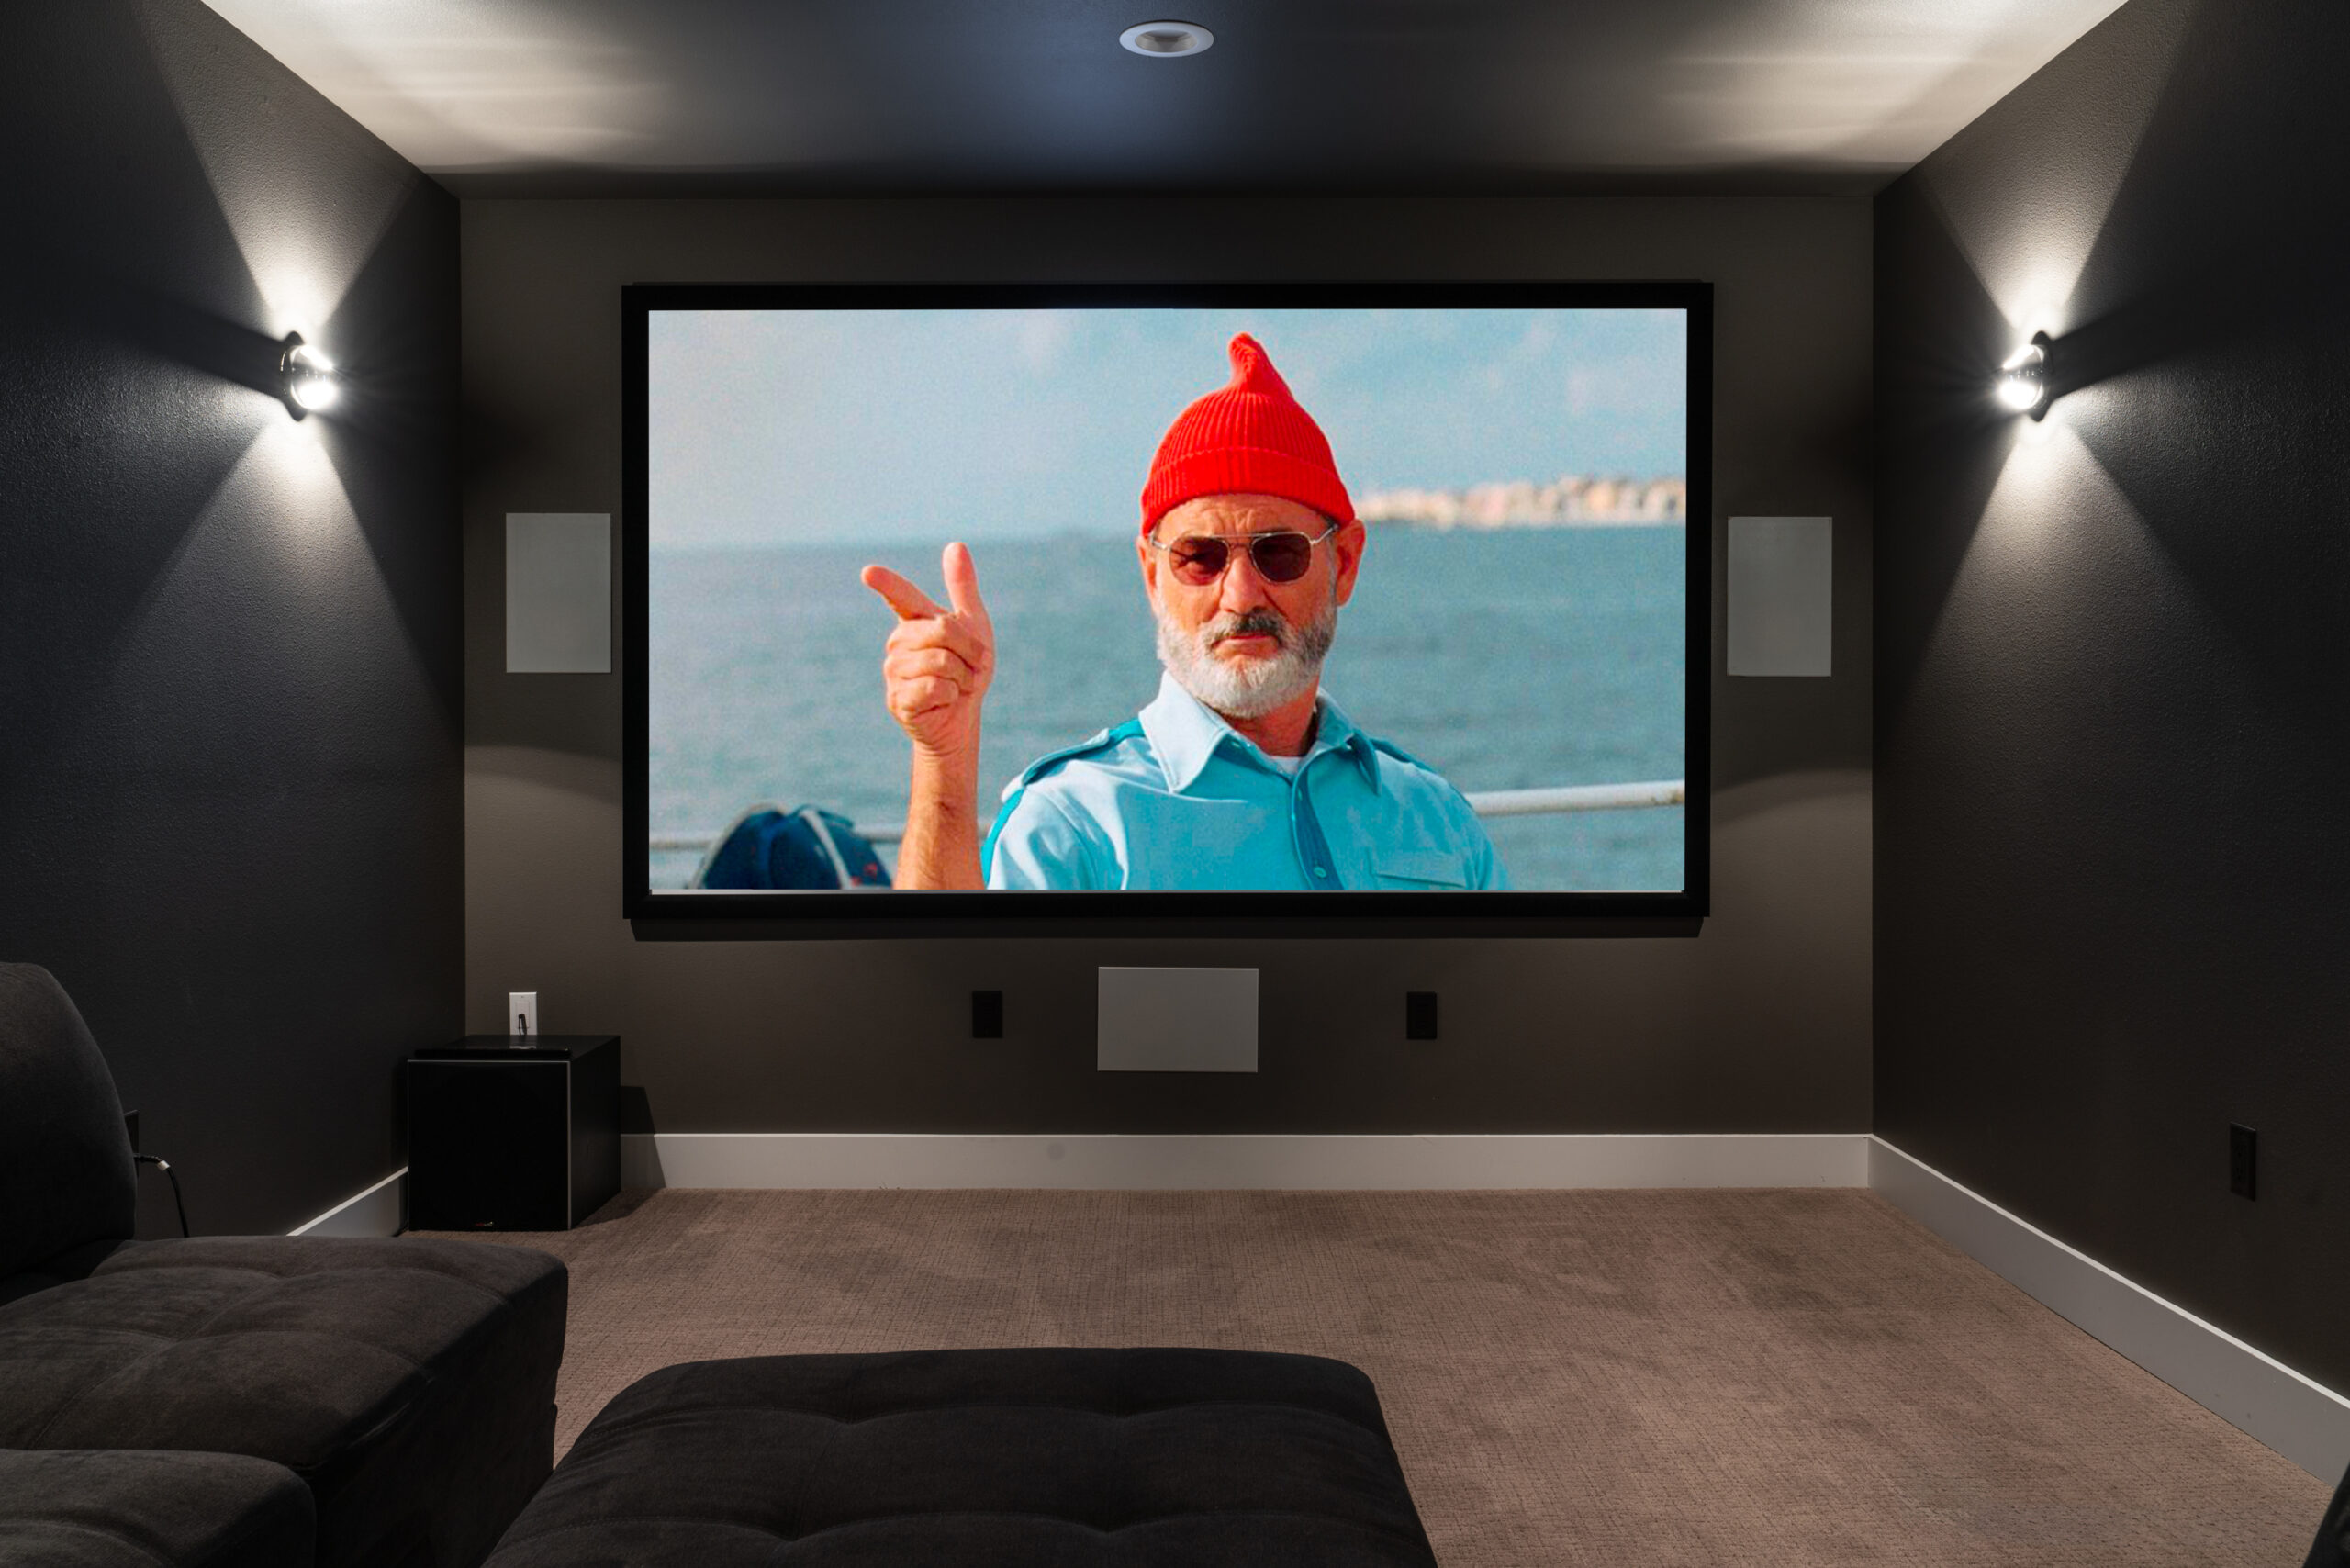 The image portrays a home theater room with a distinctive ambiance, featuring:

Large Screen: Dominating one wall, displaying an image with a person making a peace sign.
Dark Walls: Creating a cinema-like atmosphere, enhanced by modern lighting.
Comfortable Seating: Plush black armchairs offer a prime viewing experience.
Additional Details: A subwoofer and wall-mounted lights are visible, completing the home theater setup.
This description provides a glimpse into the room’s design and functionality, perfect for a cozy movie night